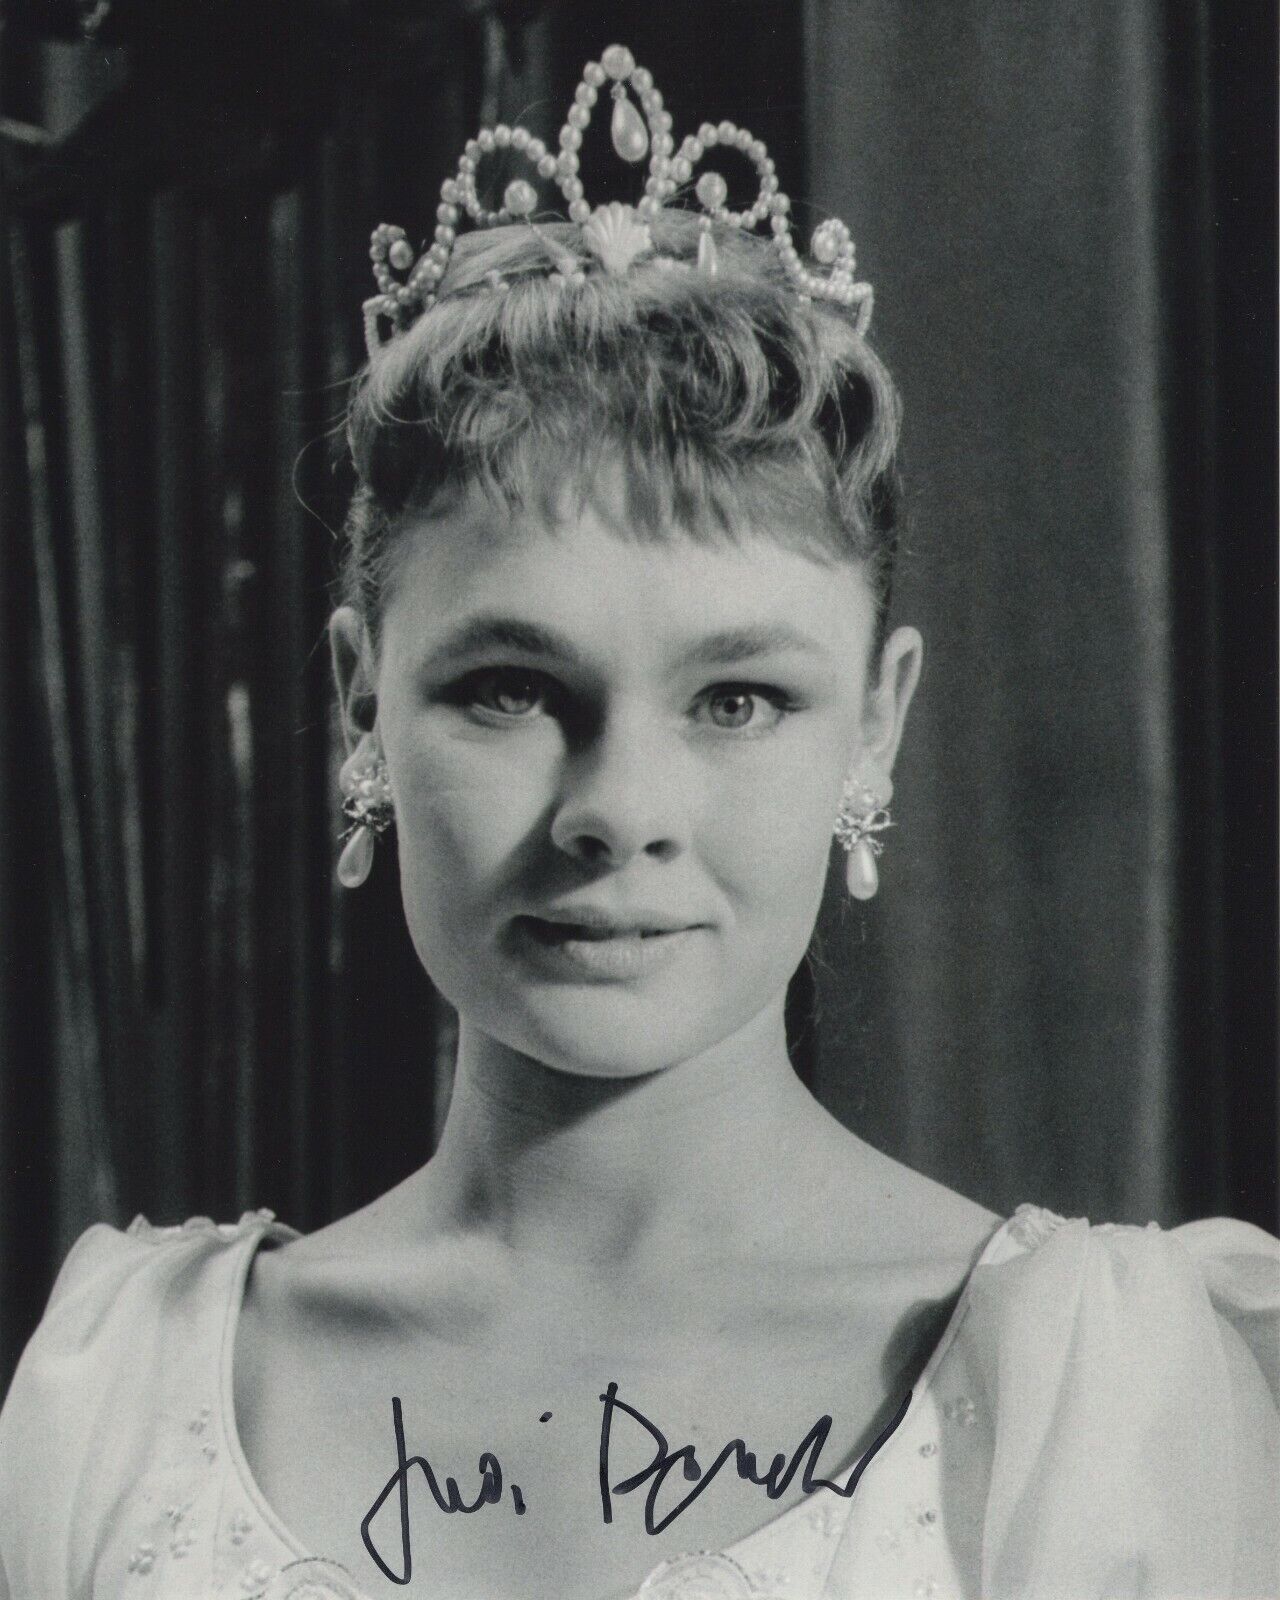 JUDI DENCH SIGNED AUTOGRAPH YOUNG BEAUTIFUL 8X10 Photo Poster painting JAMES BOND 007